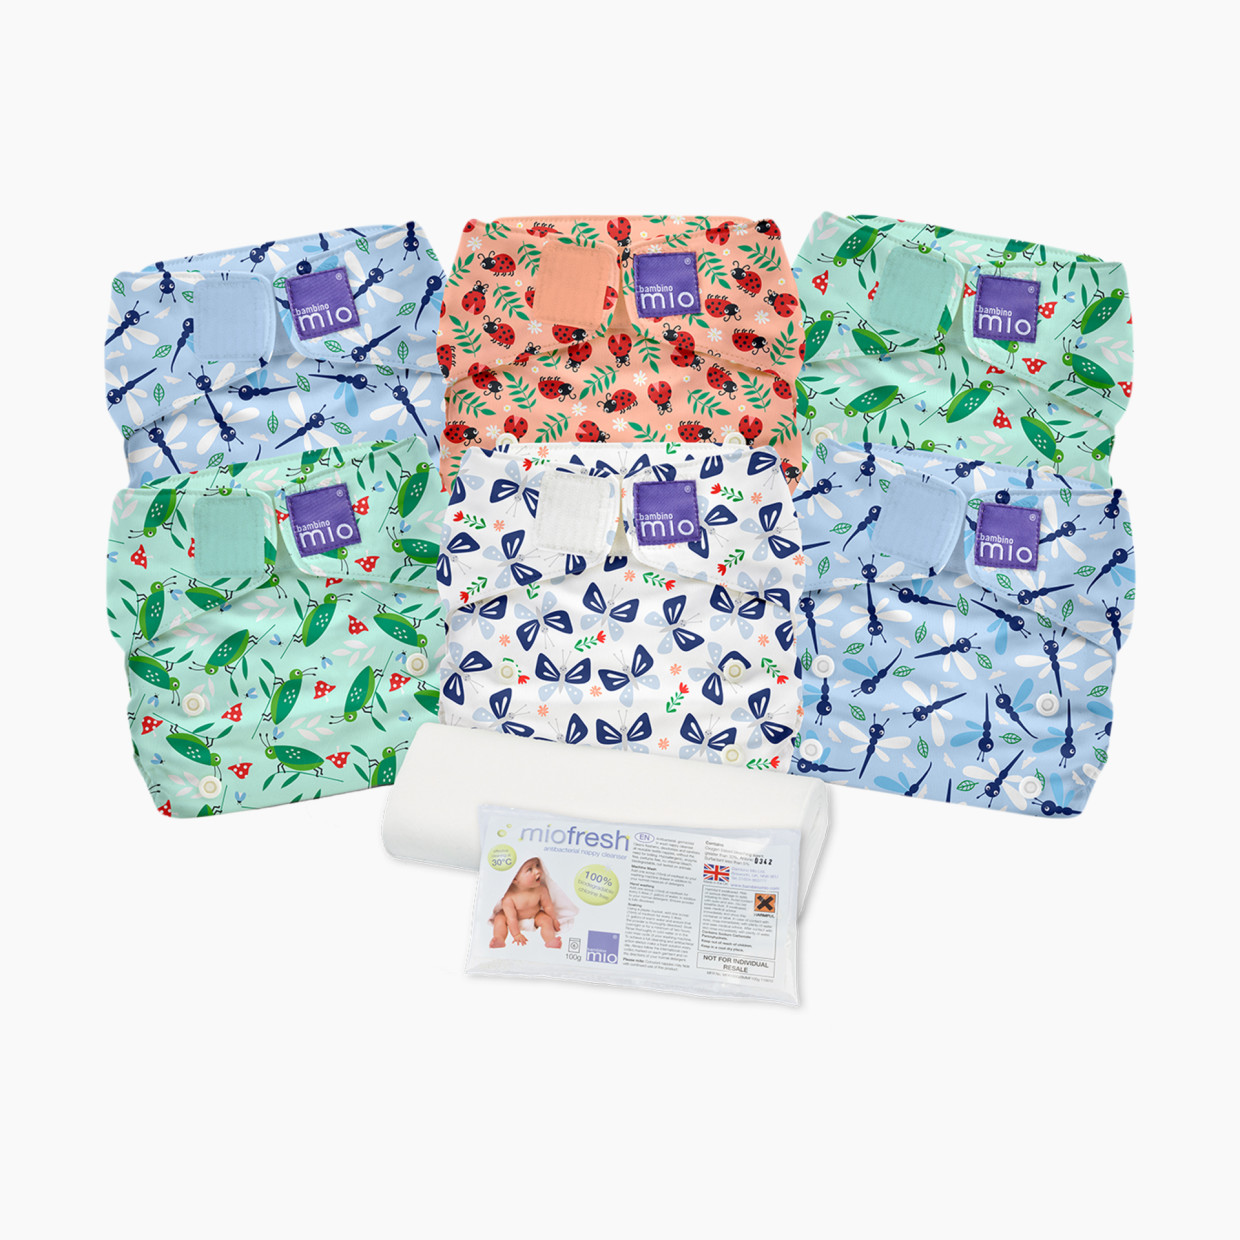 Bambino Mio Miosolo All-In-One Reusable Cloth Diaper Set (6 Pack) - Bug's Life.